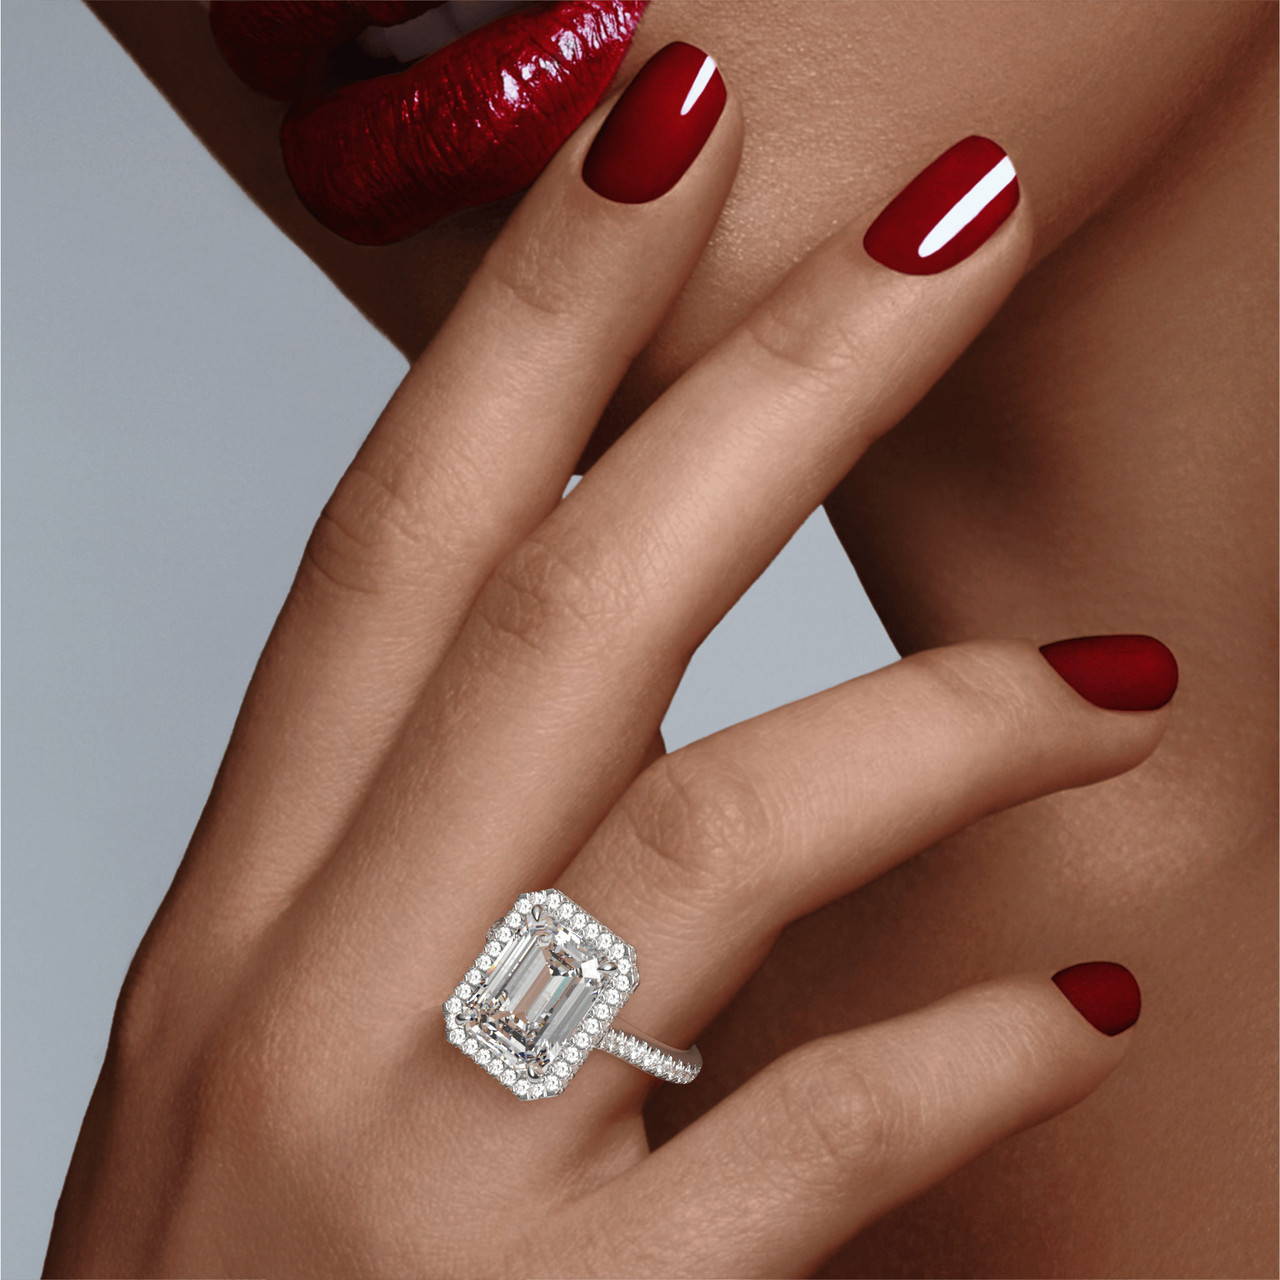 emerald cut diamond engagement ring with a halo